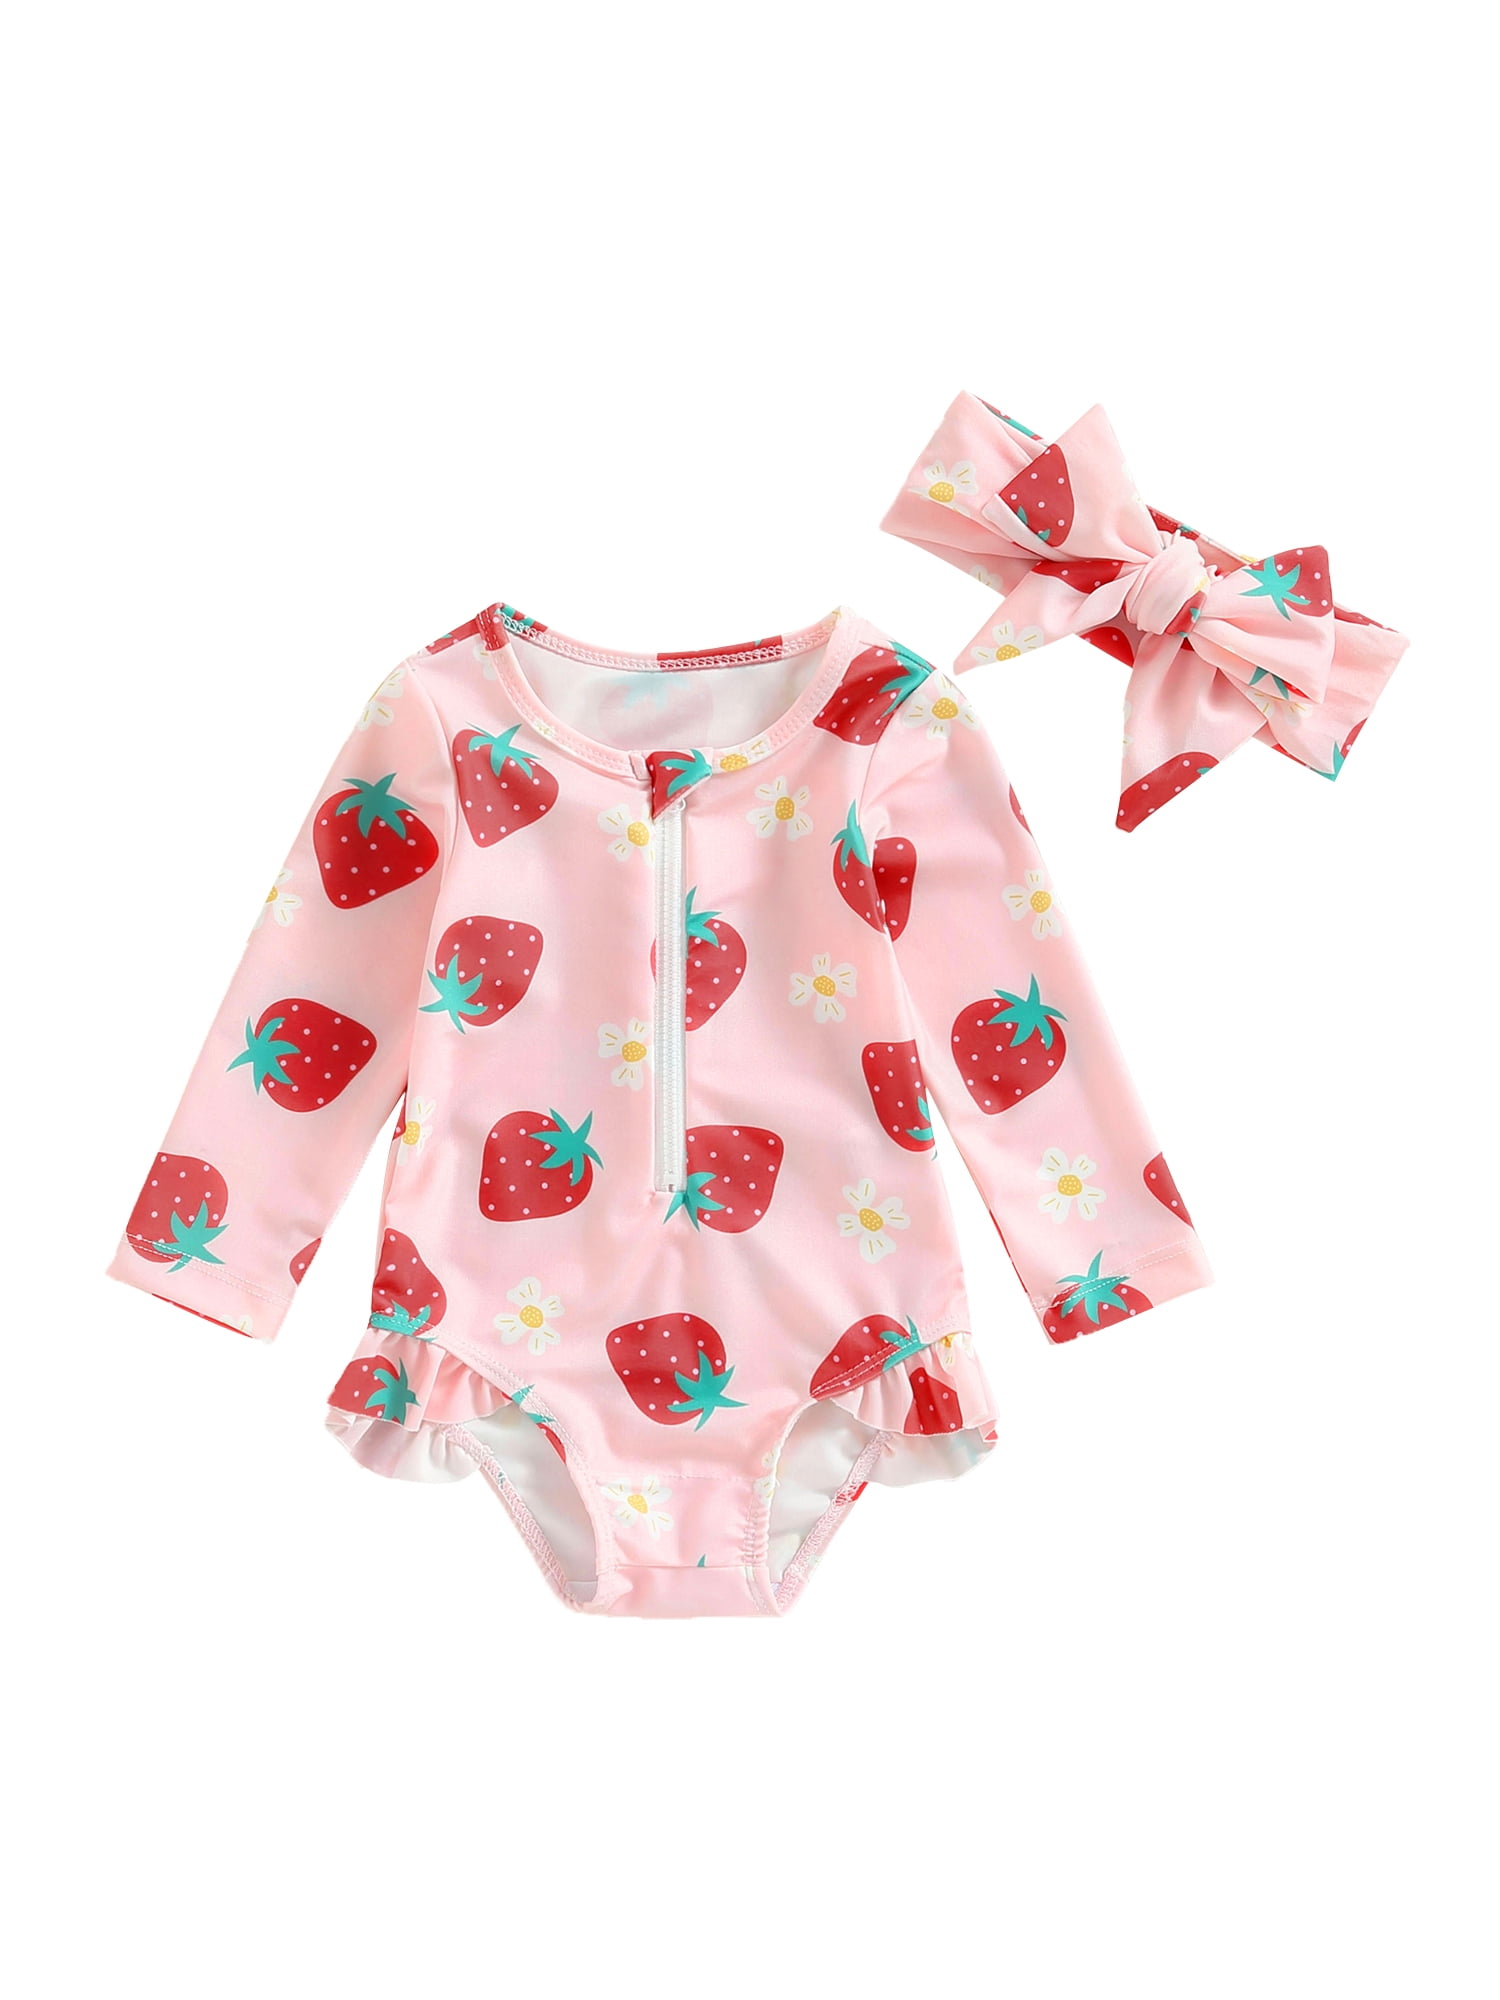 Toddler Swimsuits Baby Girls Swimwear and Headband Floral Print Bathing ...